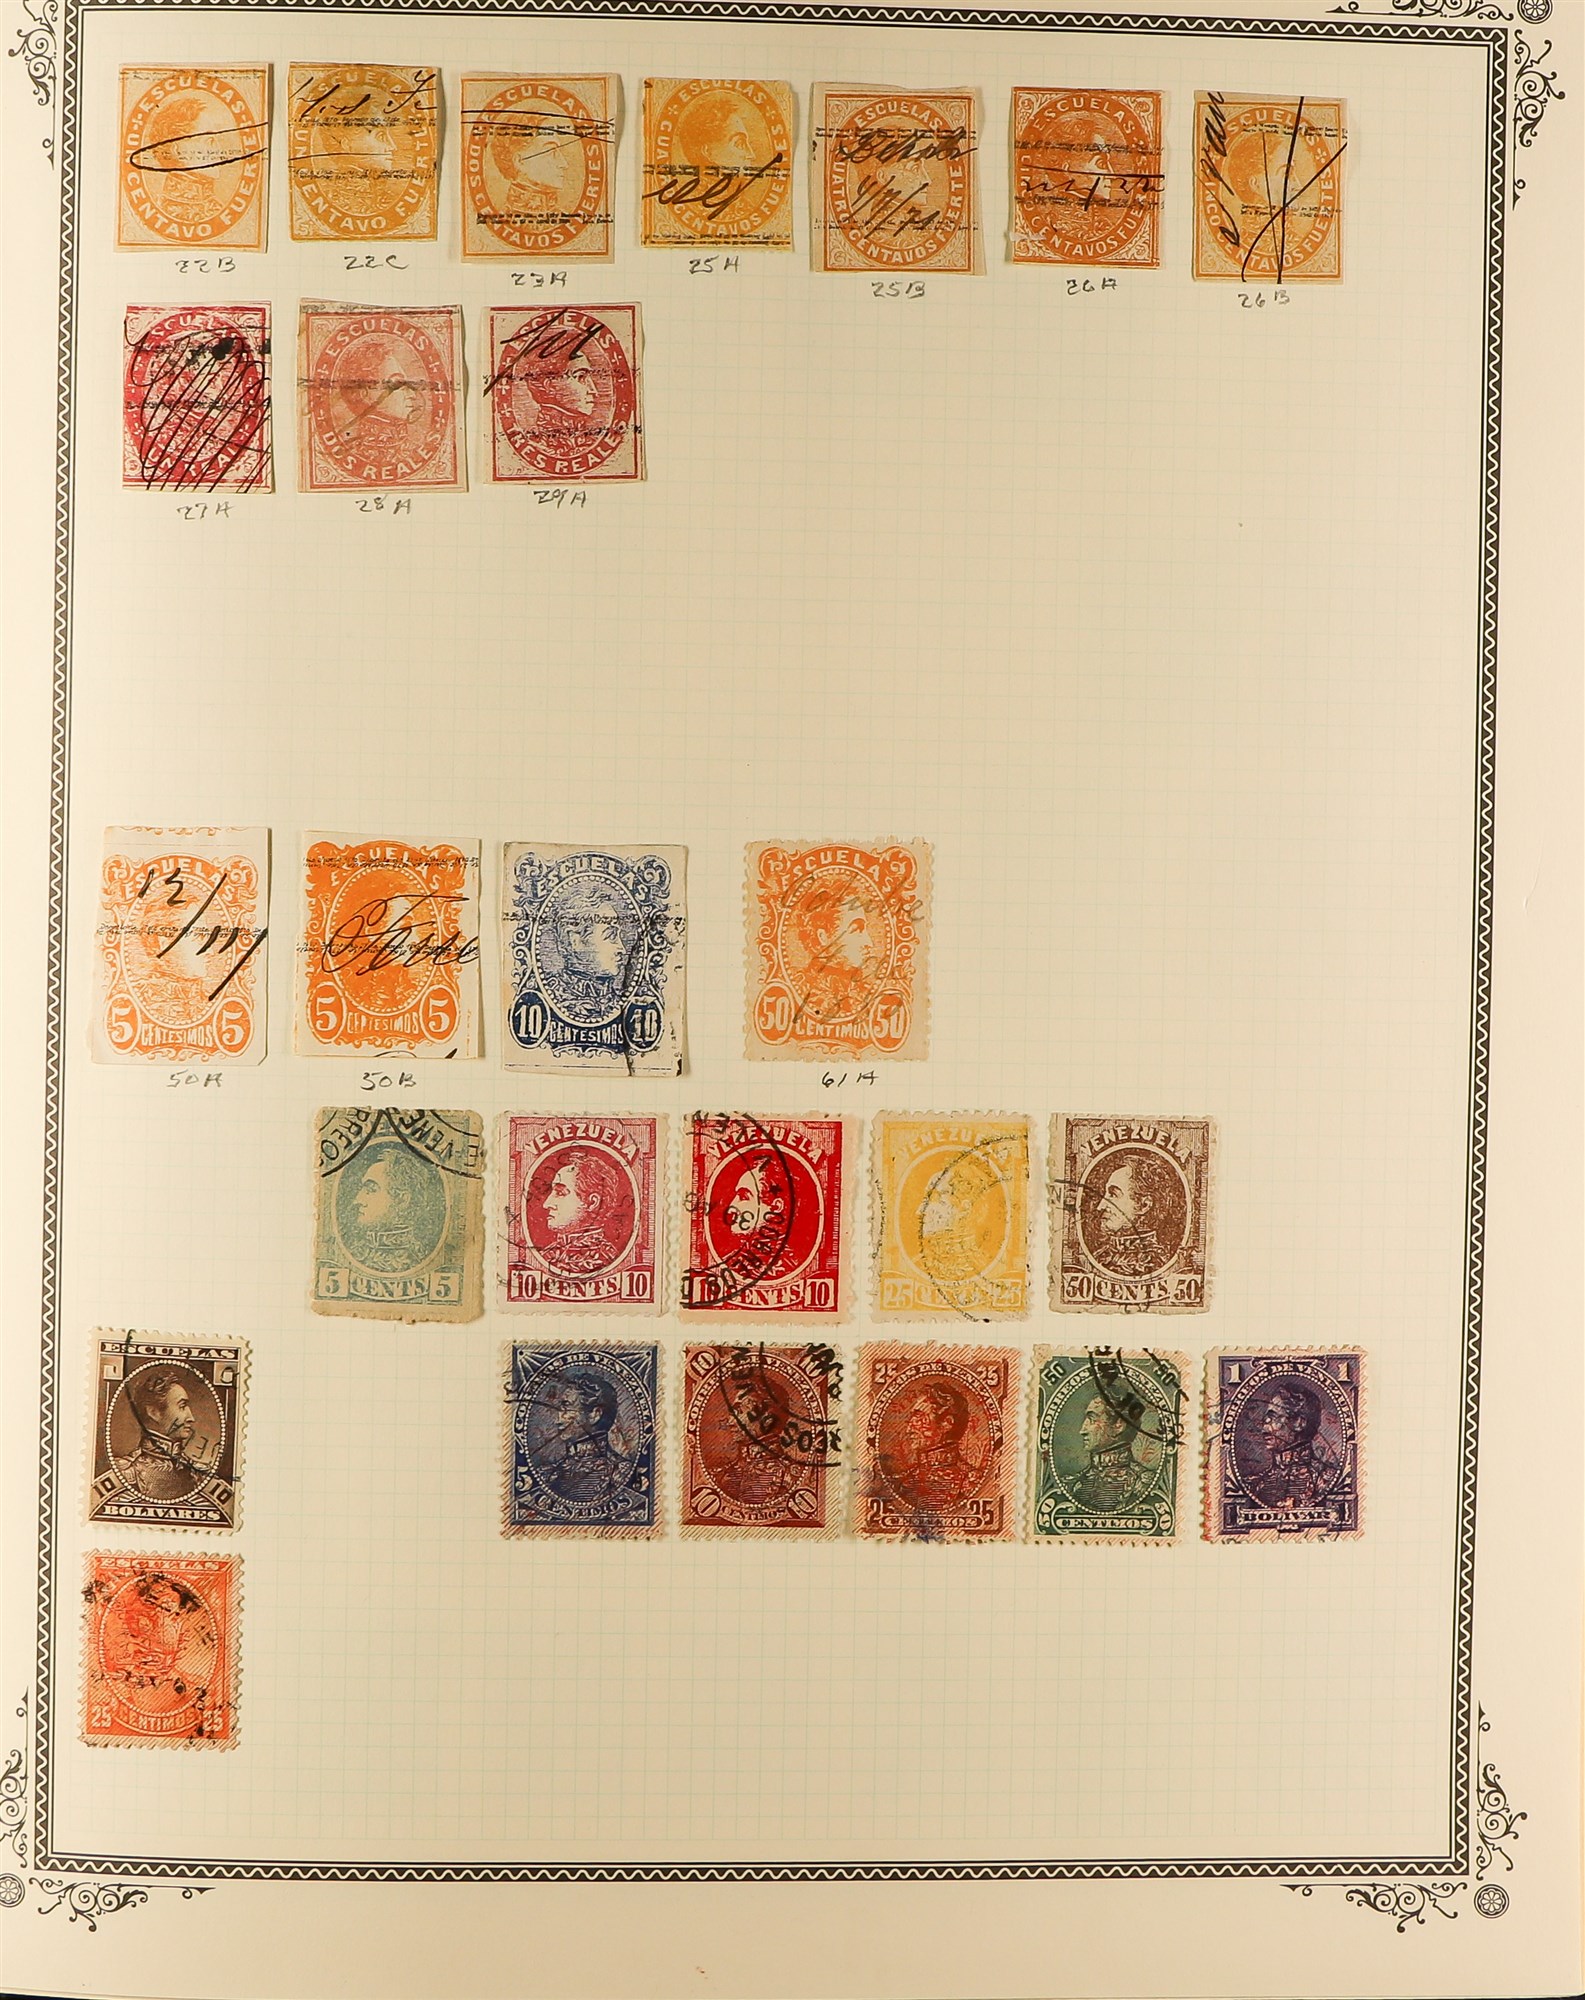 VENEZUELA 1859 - 1976 COLLECTION of 1500+ mint & used stamps in album, note 1859-62 Coat of Arms, - Image 3 of 19